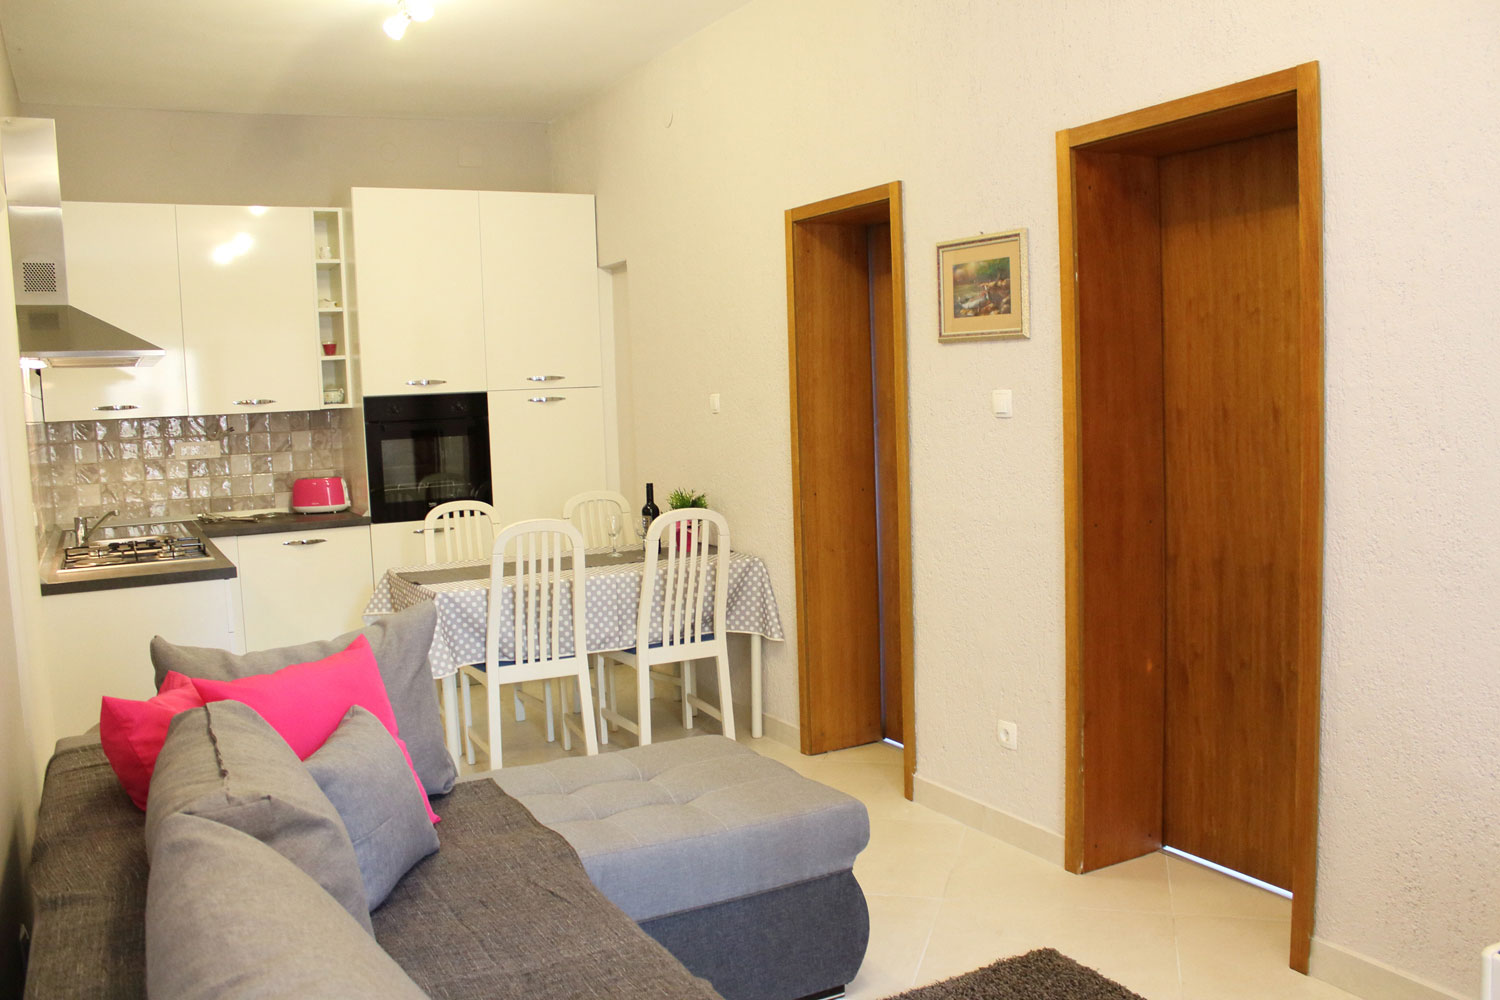 Private apartment for rent for 5 persons in Opatija with living room